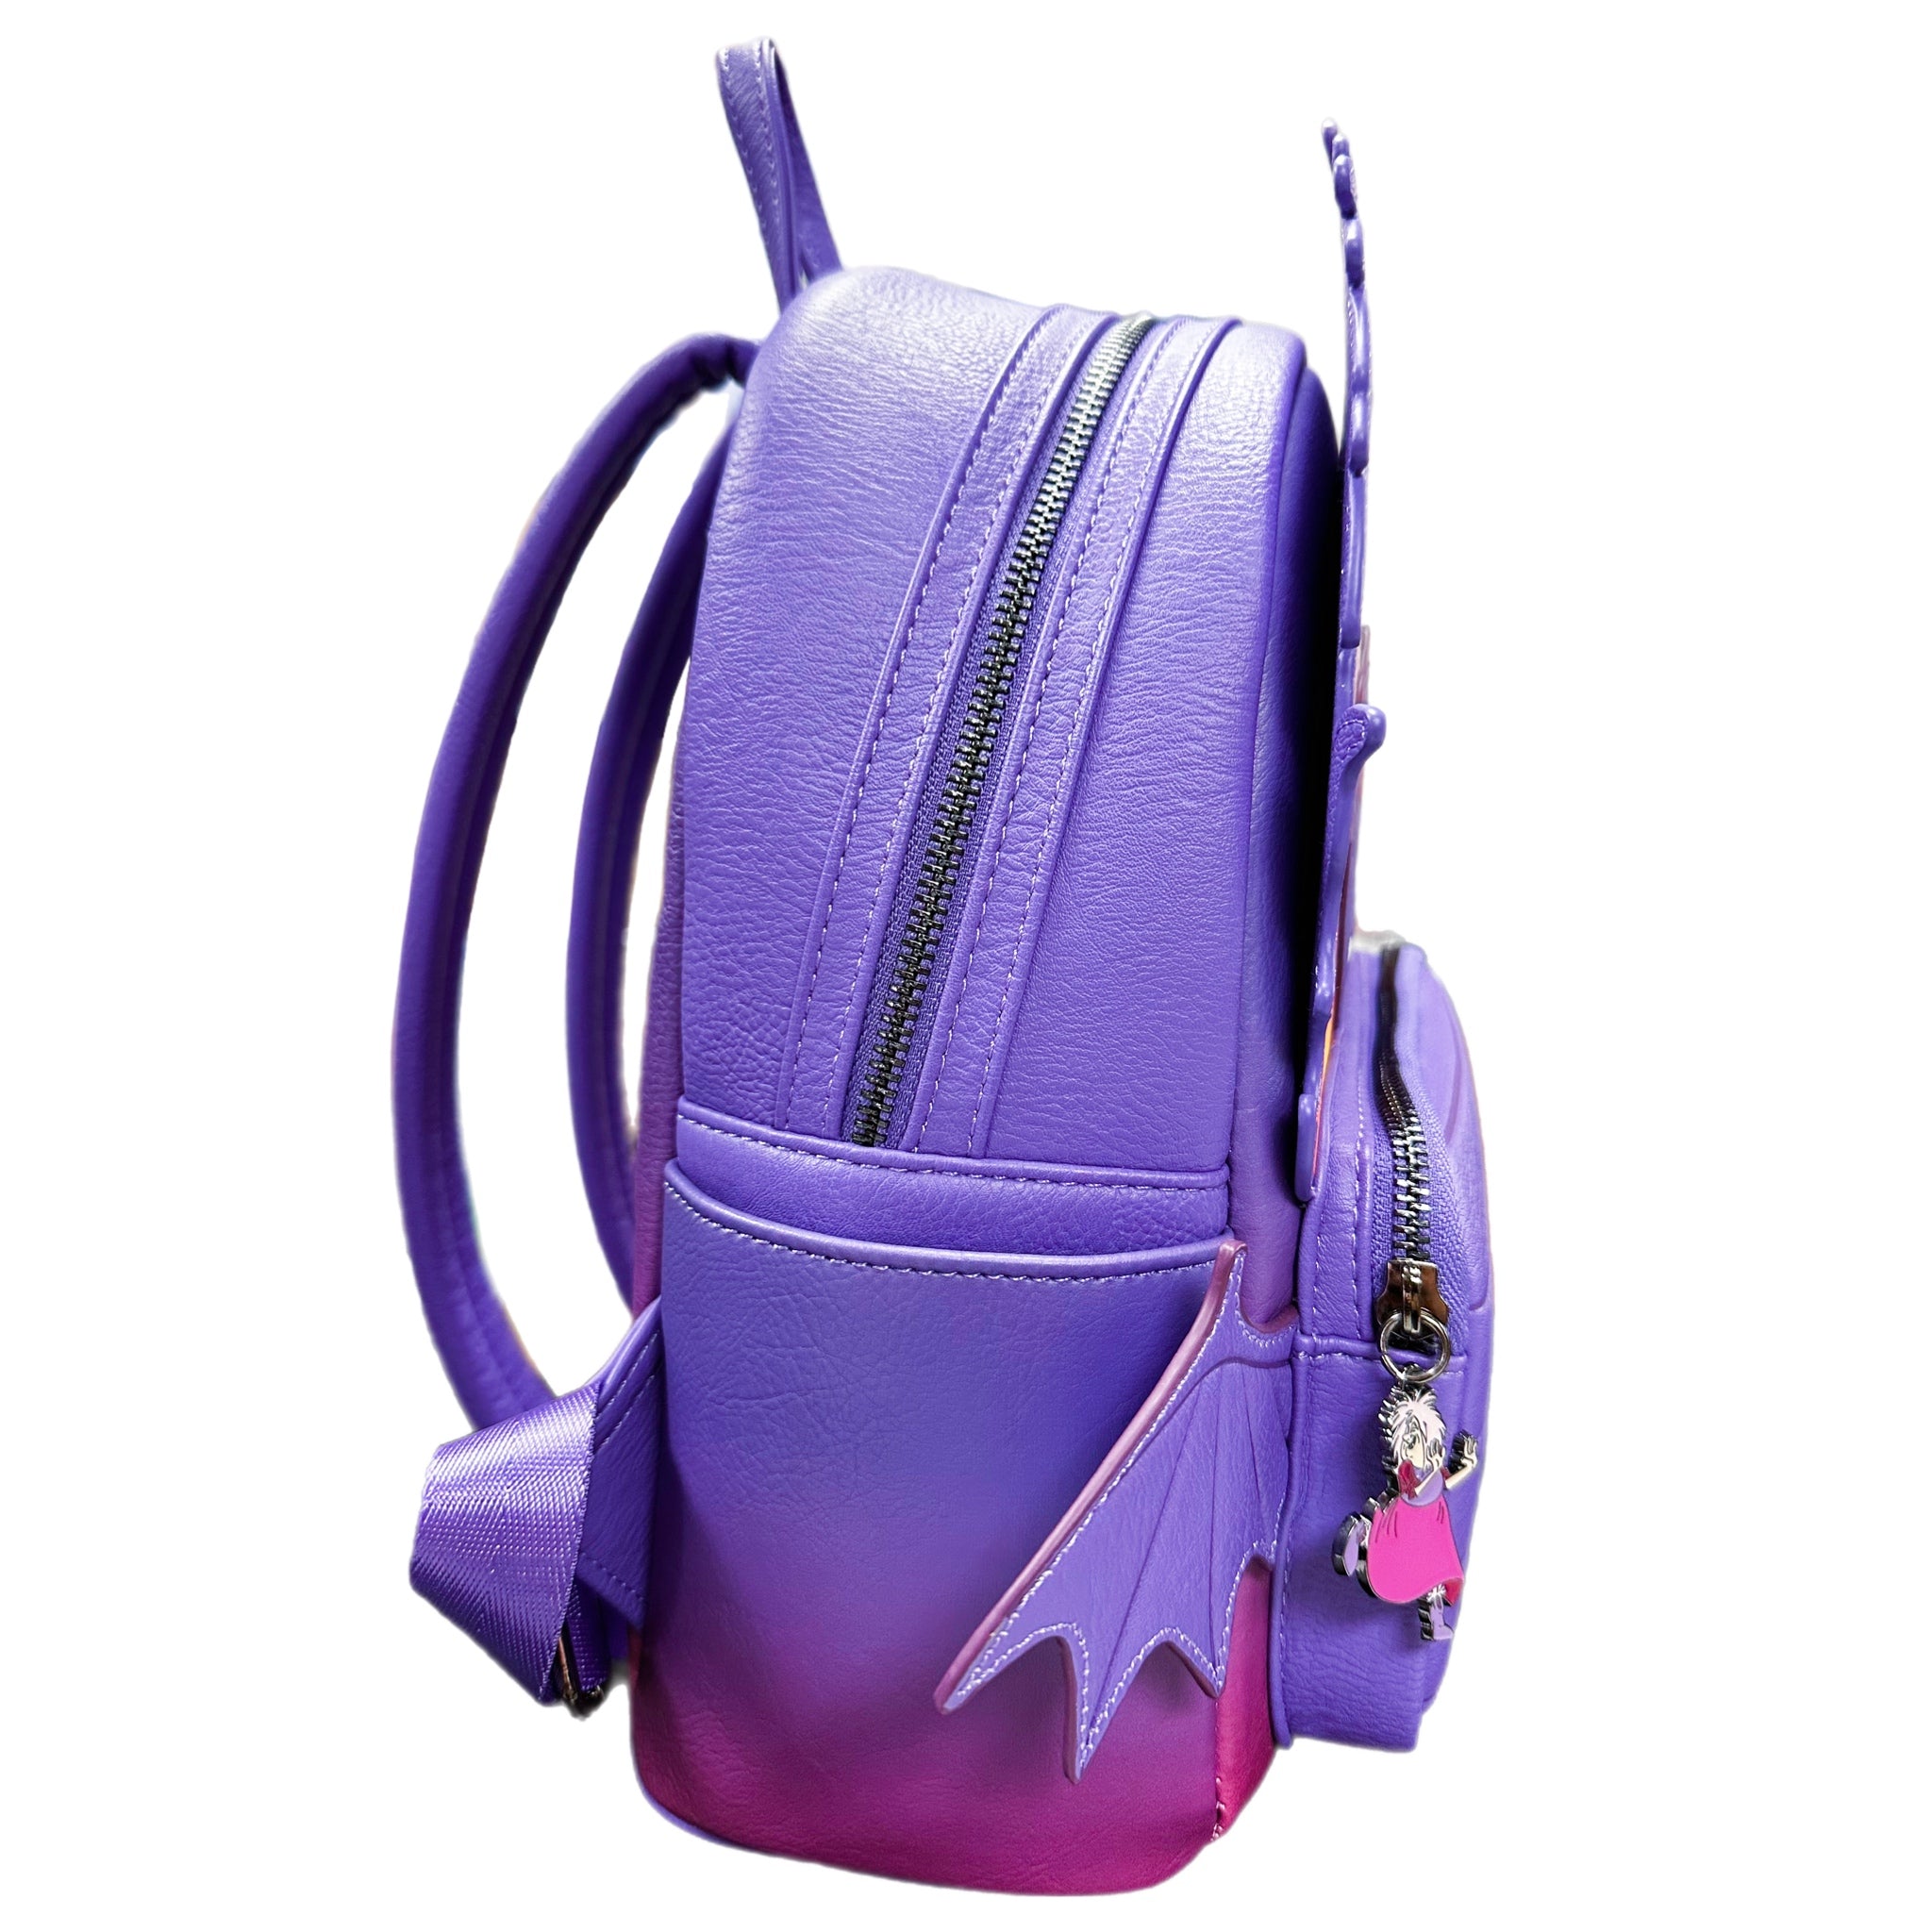 Loungefly Disney Sword In The Stone Mad Madam Mim Dragon Cosplay Mini Backpack